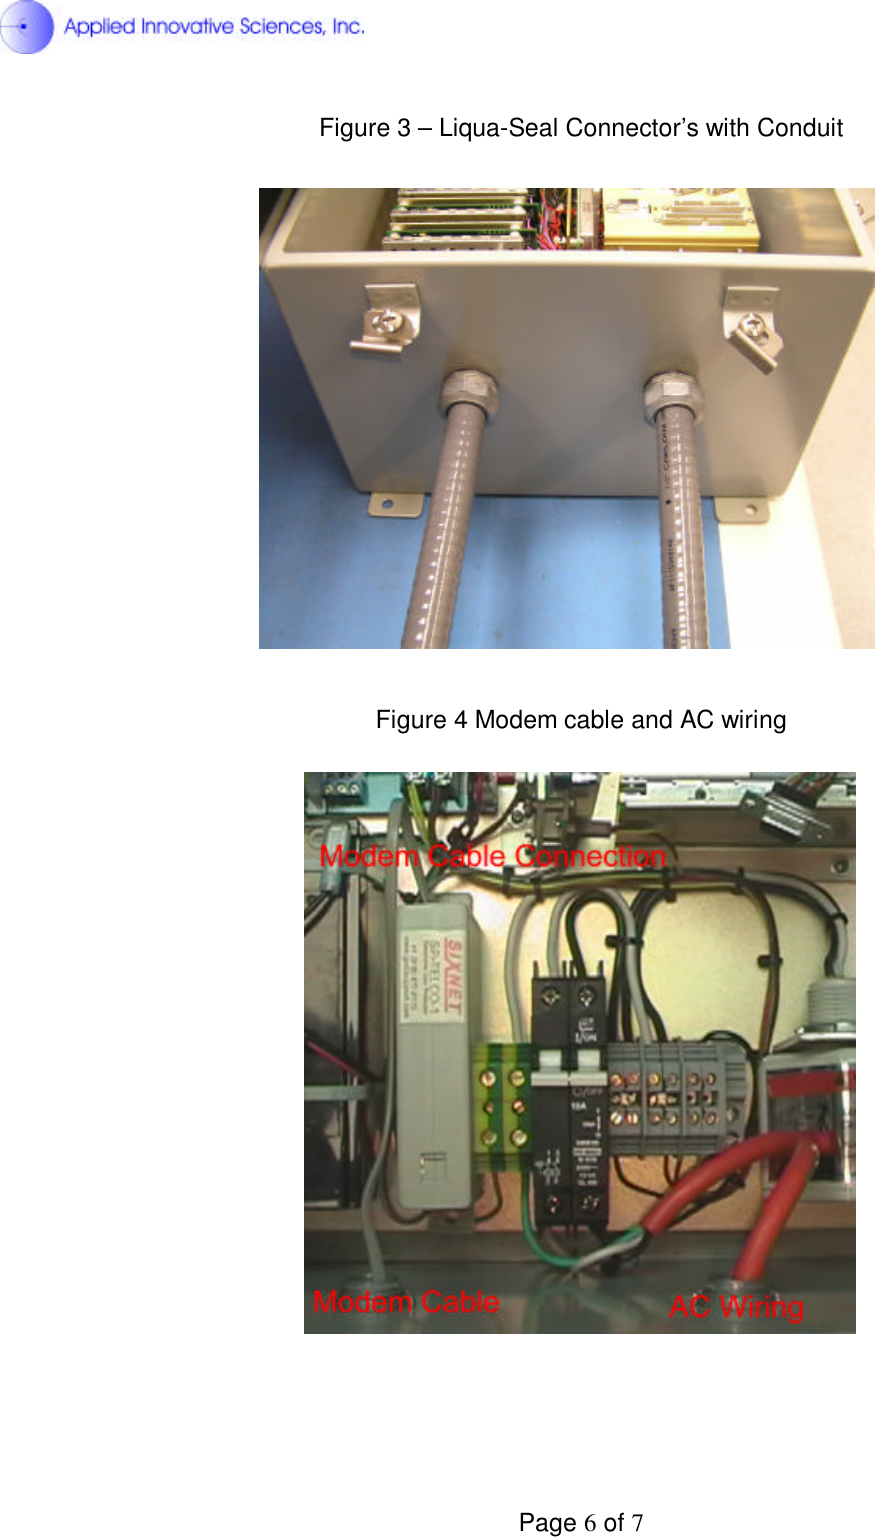  Page 6 of 7 Figure 3 – Liqua-Seal Connector’s with Conduit    Figure 4 Modem cable and AC wiring       